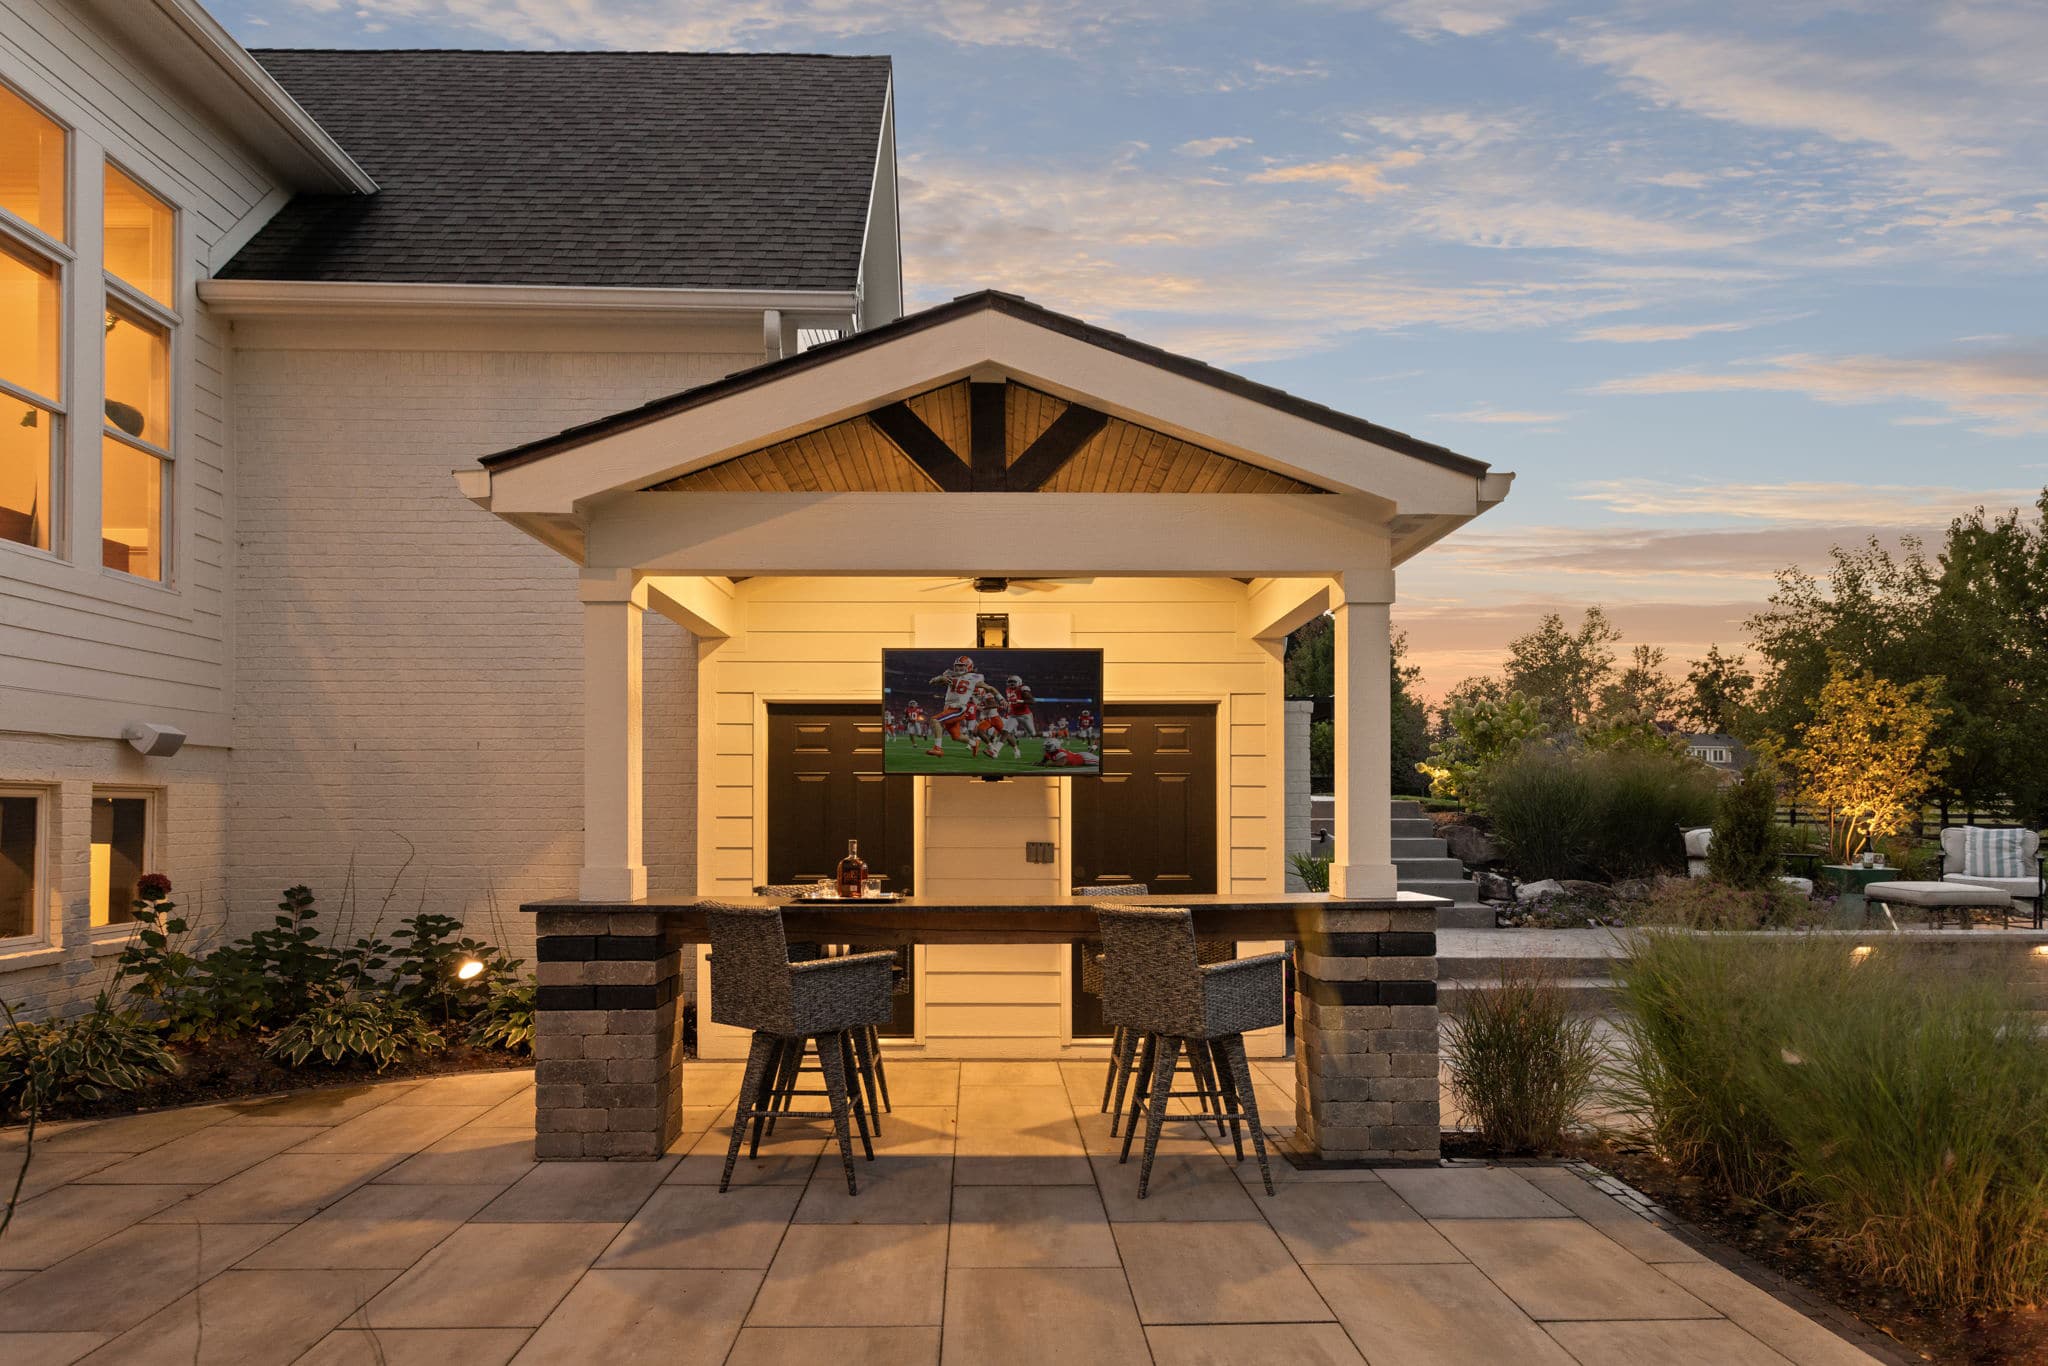 Covered outdoor living space with a bar, seating and television.